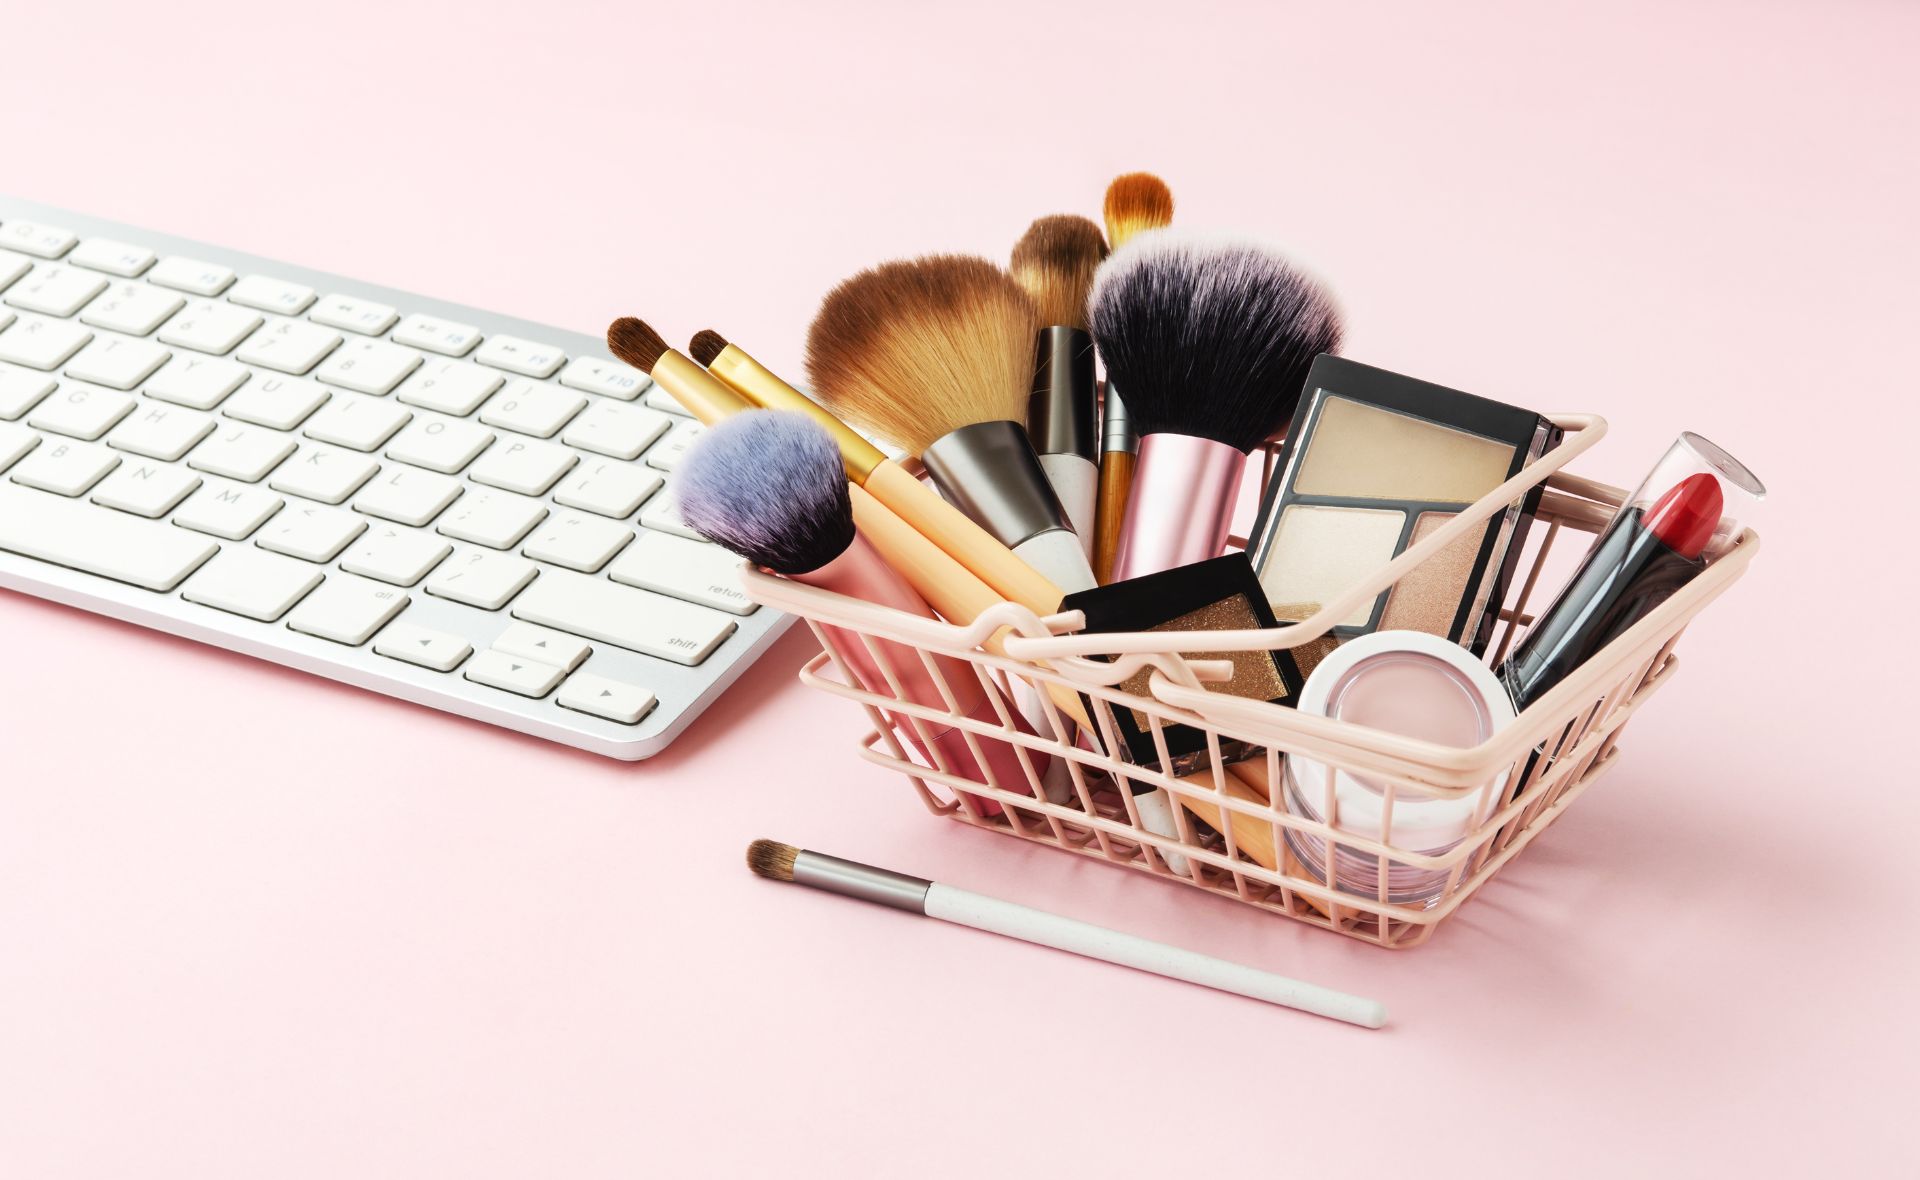 From skincare to makeup, here are our 6 top picks from Adore Beauty’s Black Friday sale